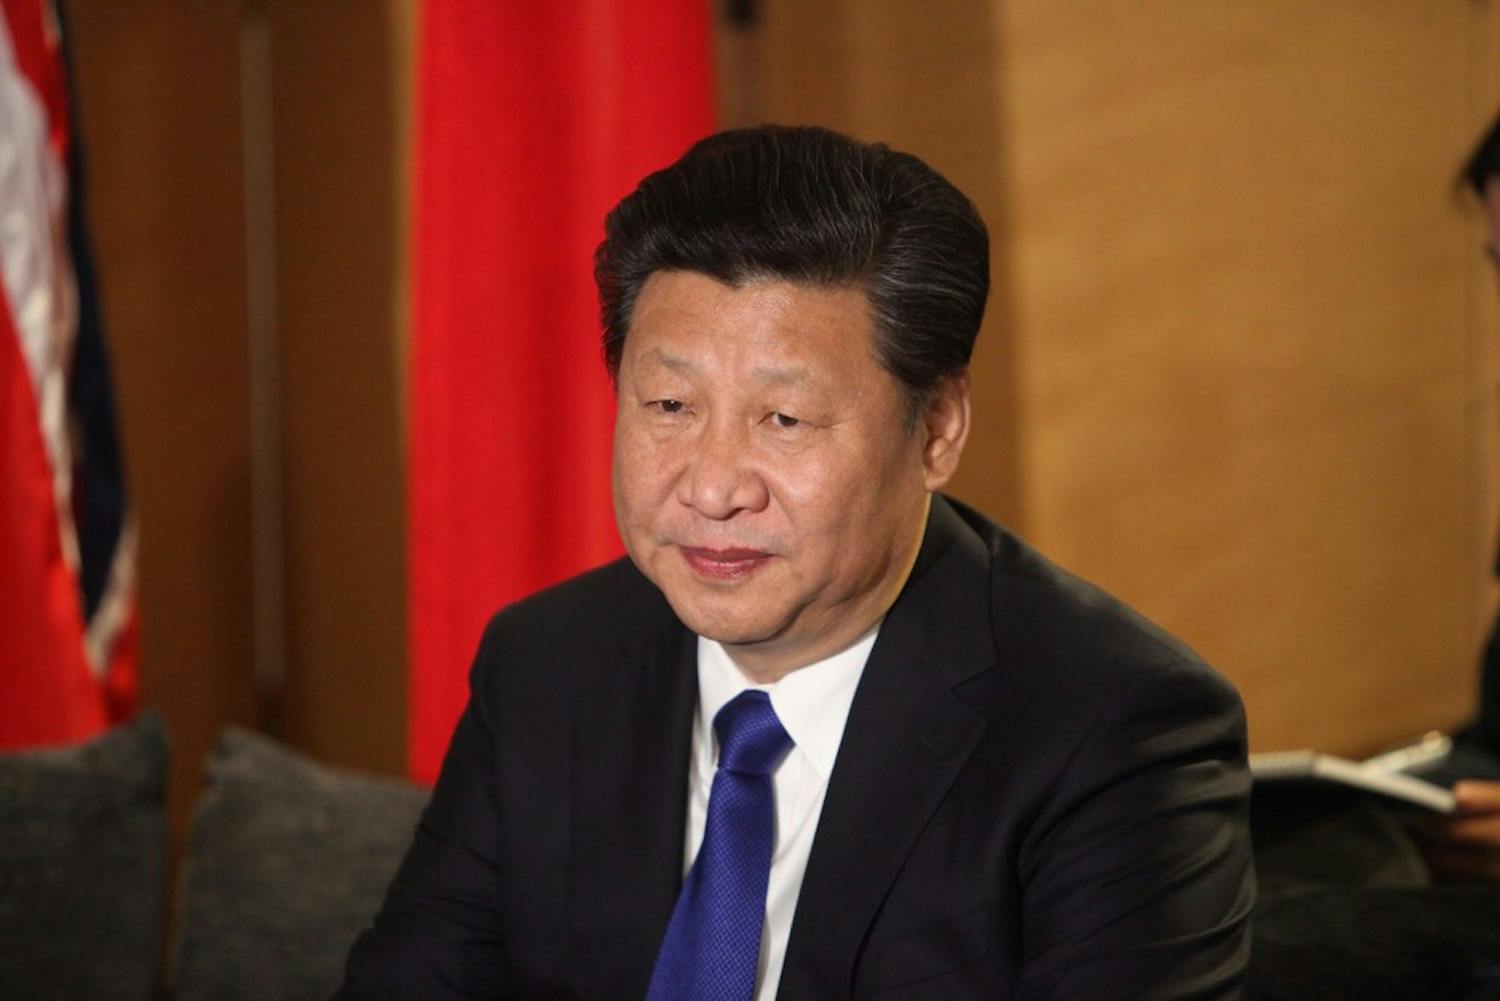 Xi Jinping, pictured here with extreme excitement on his face, can’t wait for the next state dinner.